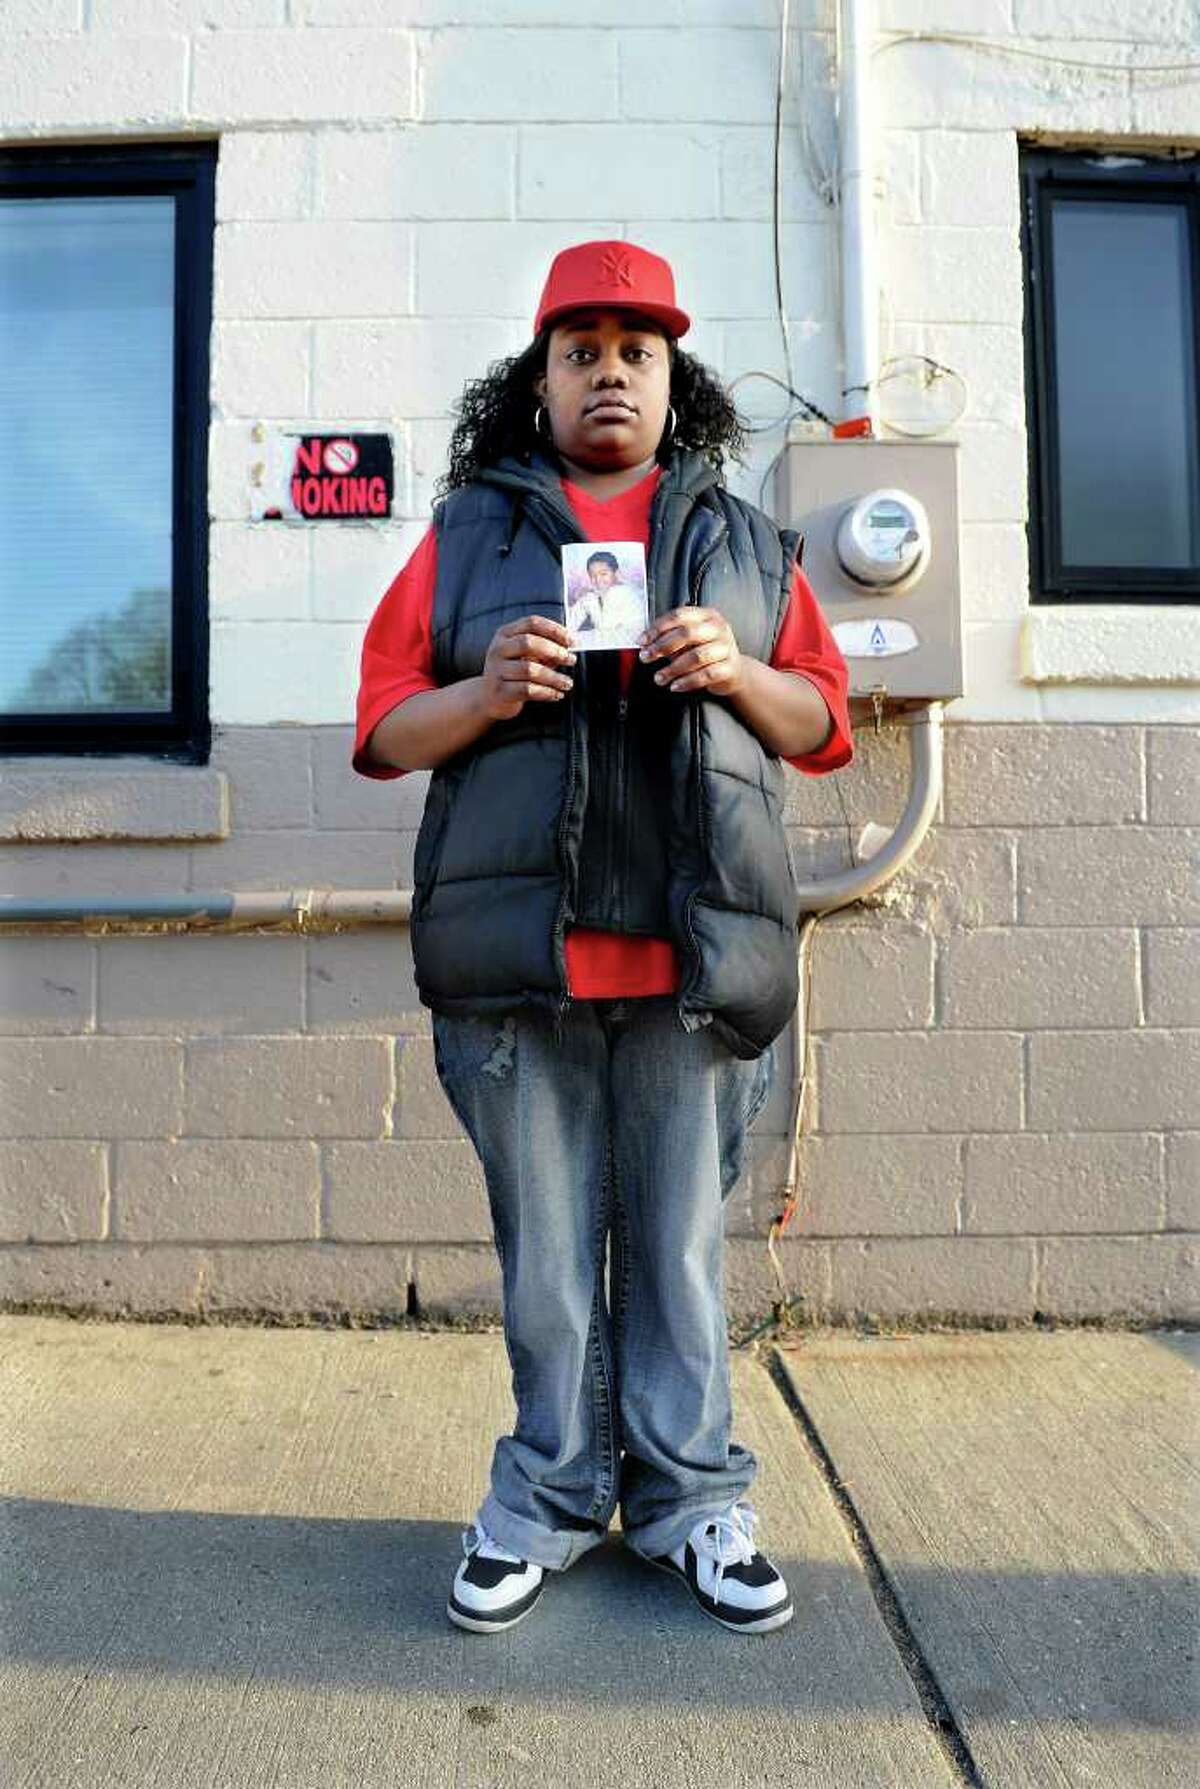 Tanya McDowell stands outside the Norwalk Emergency Shelter with a photo of her son, A.J. Paches, on Wednesday, April 20, 2011. McDowell, who is homeless and lives in her van, was arrested after enrolling her son in the Norwalk City School District.